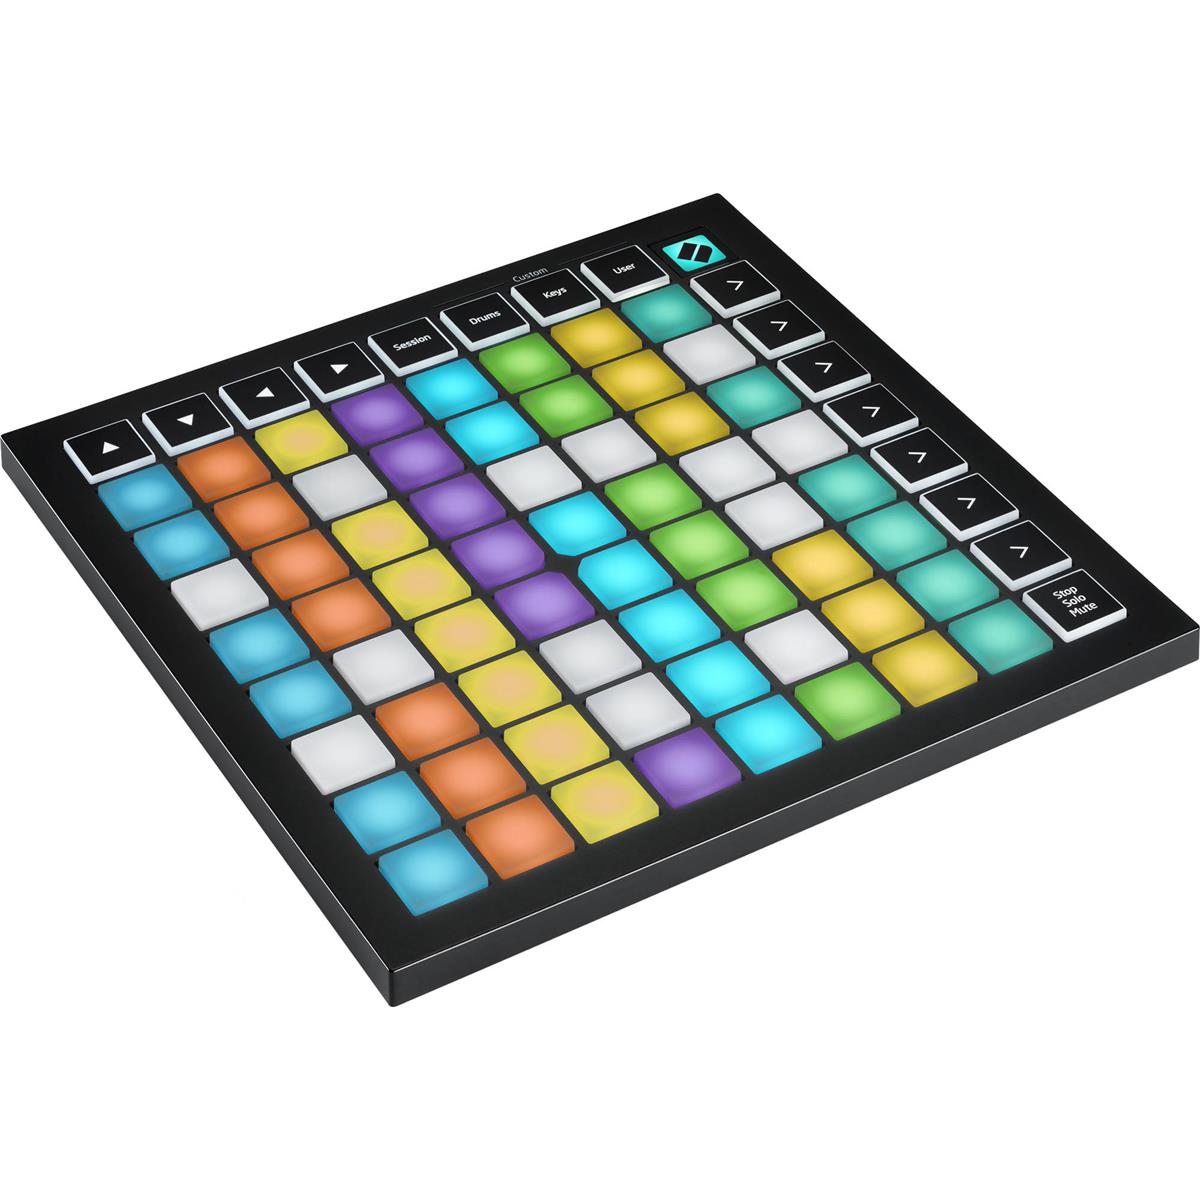 Image of Novation Launchpad Mini MK3 Grid Controller for Ableton Live